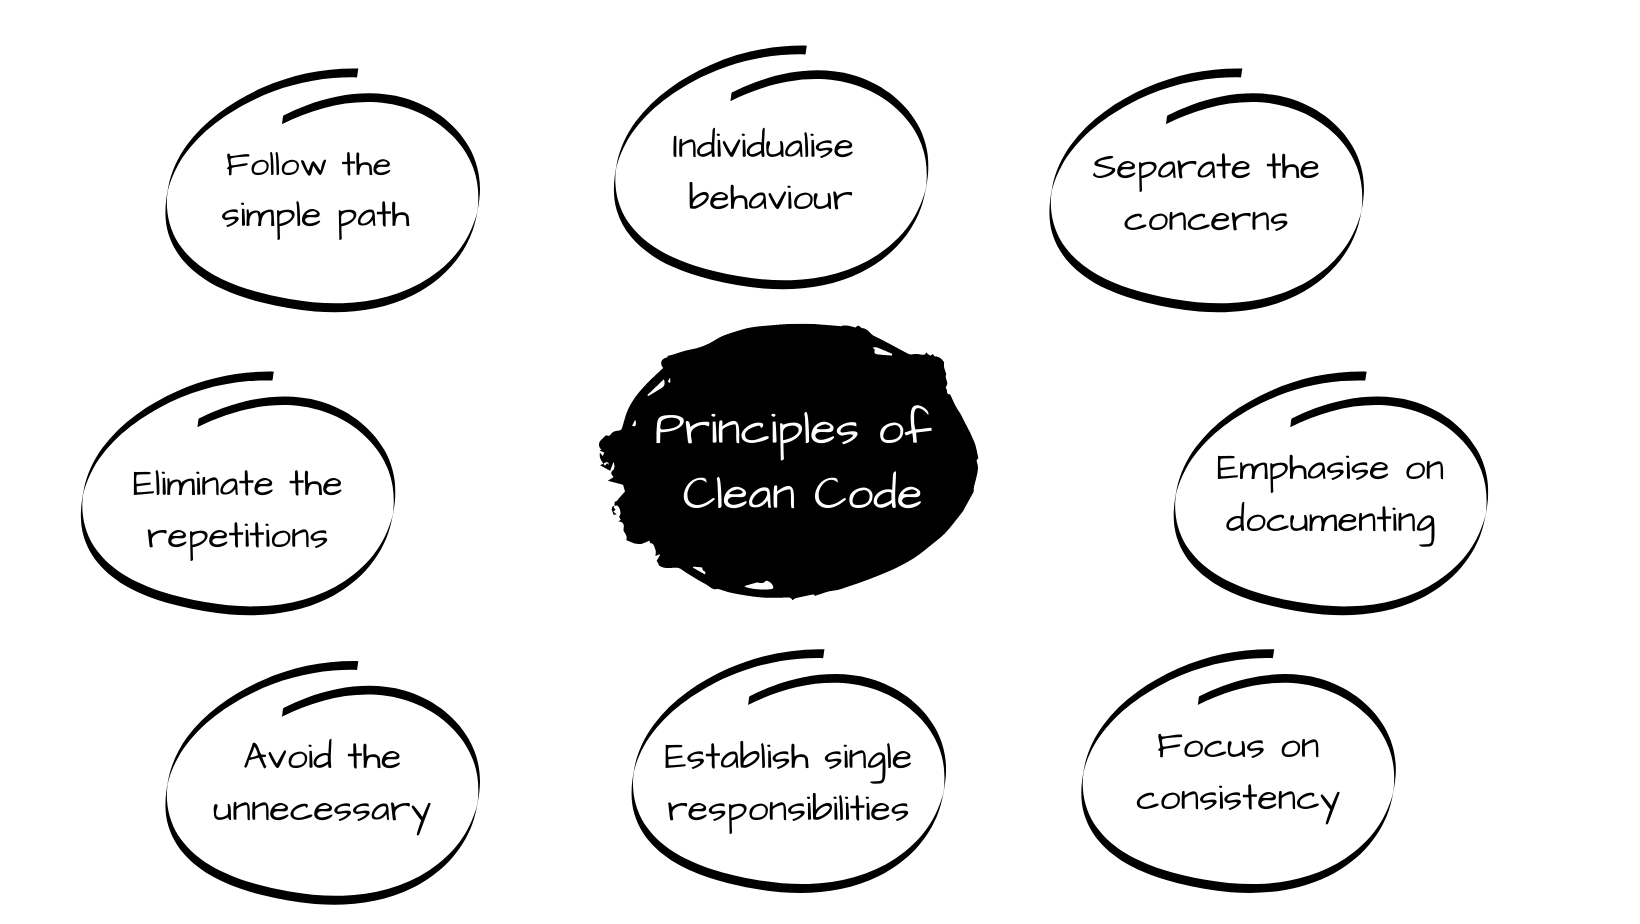 The principles of clean code are written in eight circles.